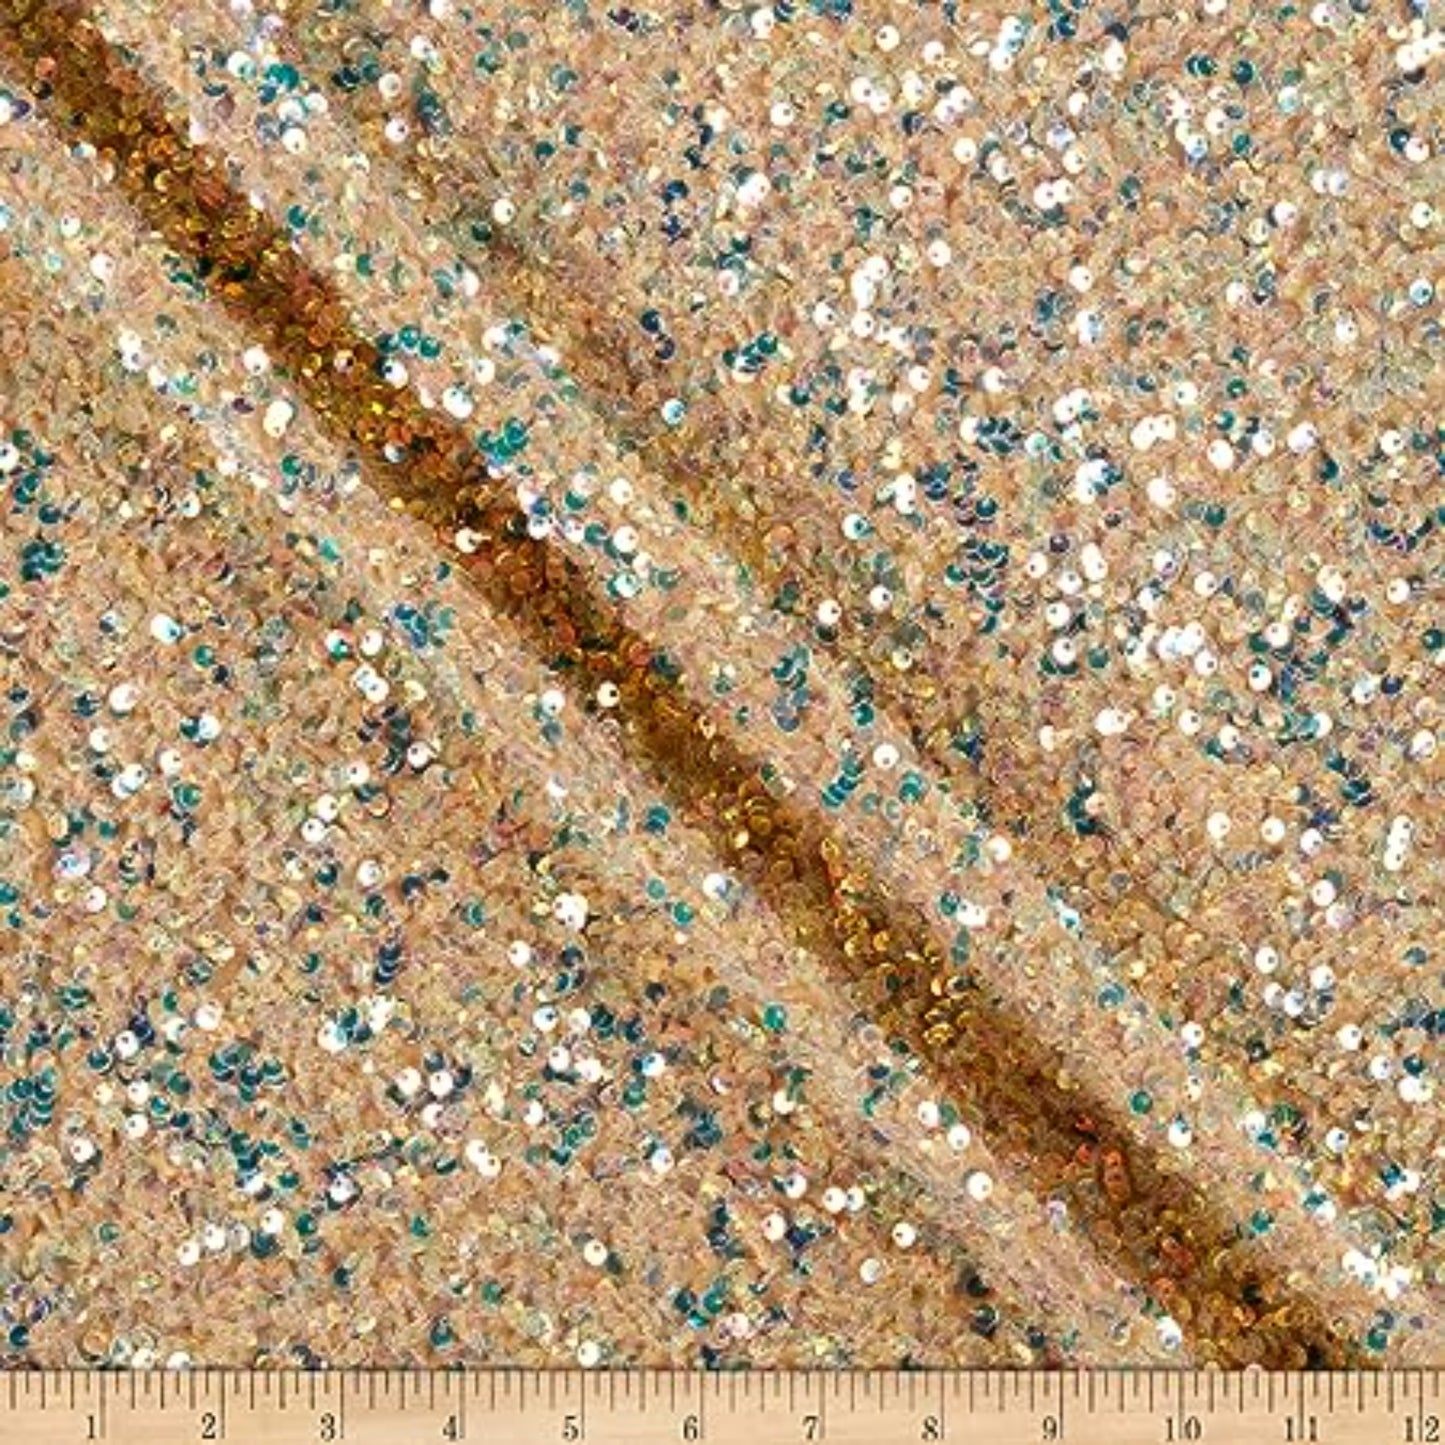 Stretch Velvet Sequin Fabric by The Yard, Glitter Spandex Material